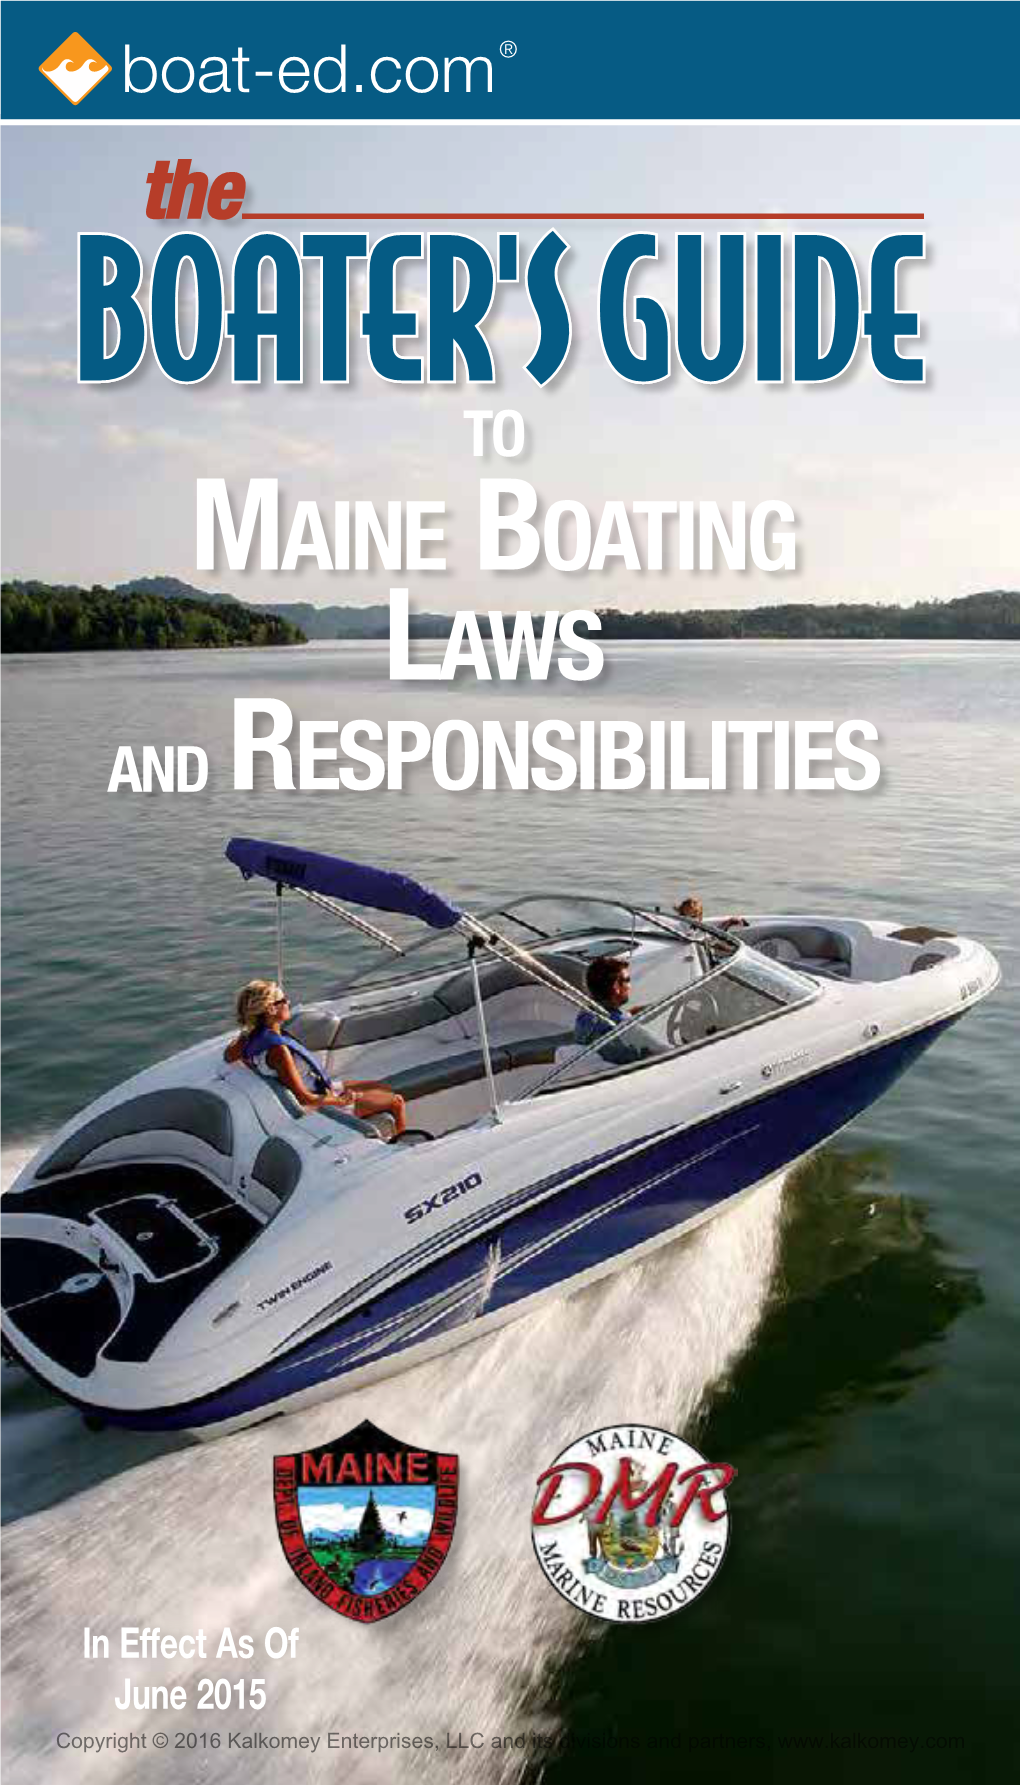 The Boater's Guide to Maine Boating Laws and Responsibilities